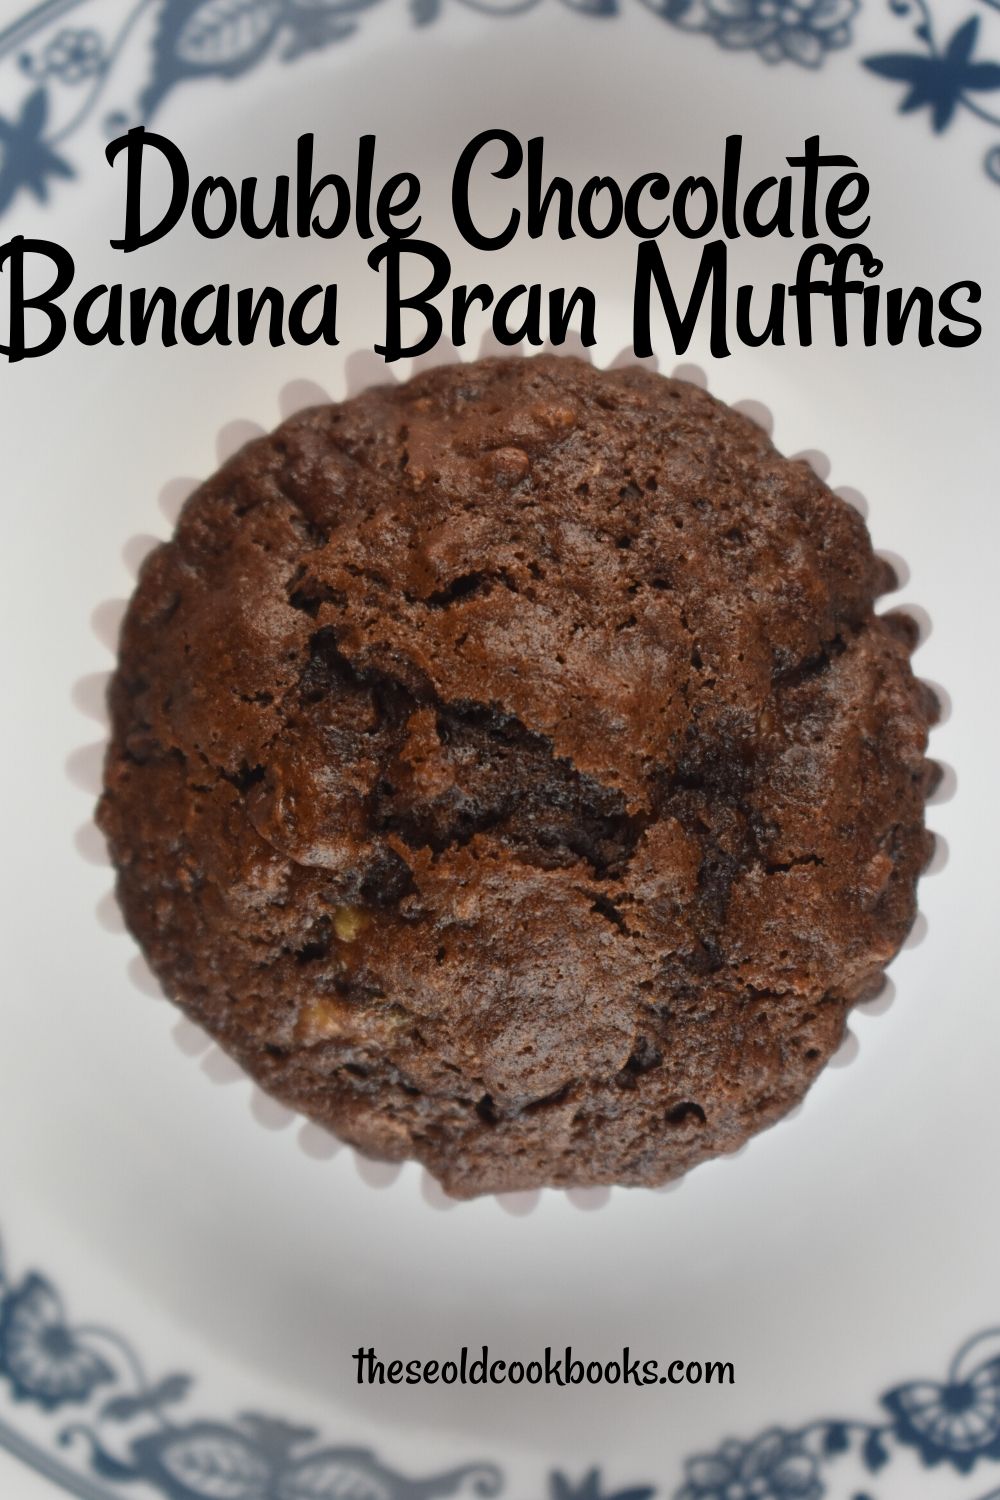 Whether you are looking for breakfast, dessert or a snack, Double Chocolate Banana Bran Muffins will check the box.  Made with All-Bran cereal and mashed bananas, you don't have to feel guilty this double dose of chocolate. 